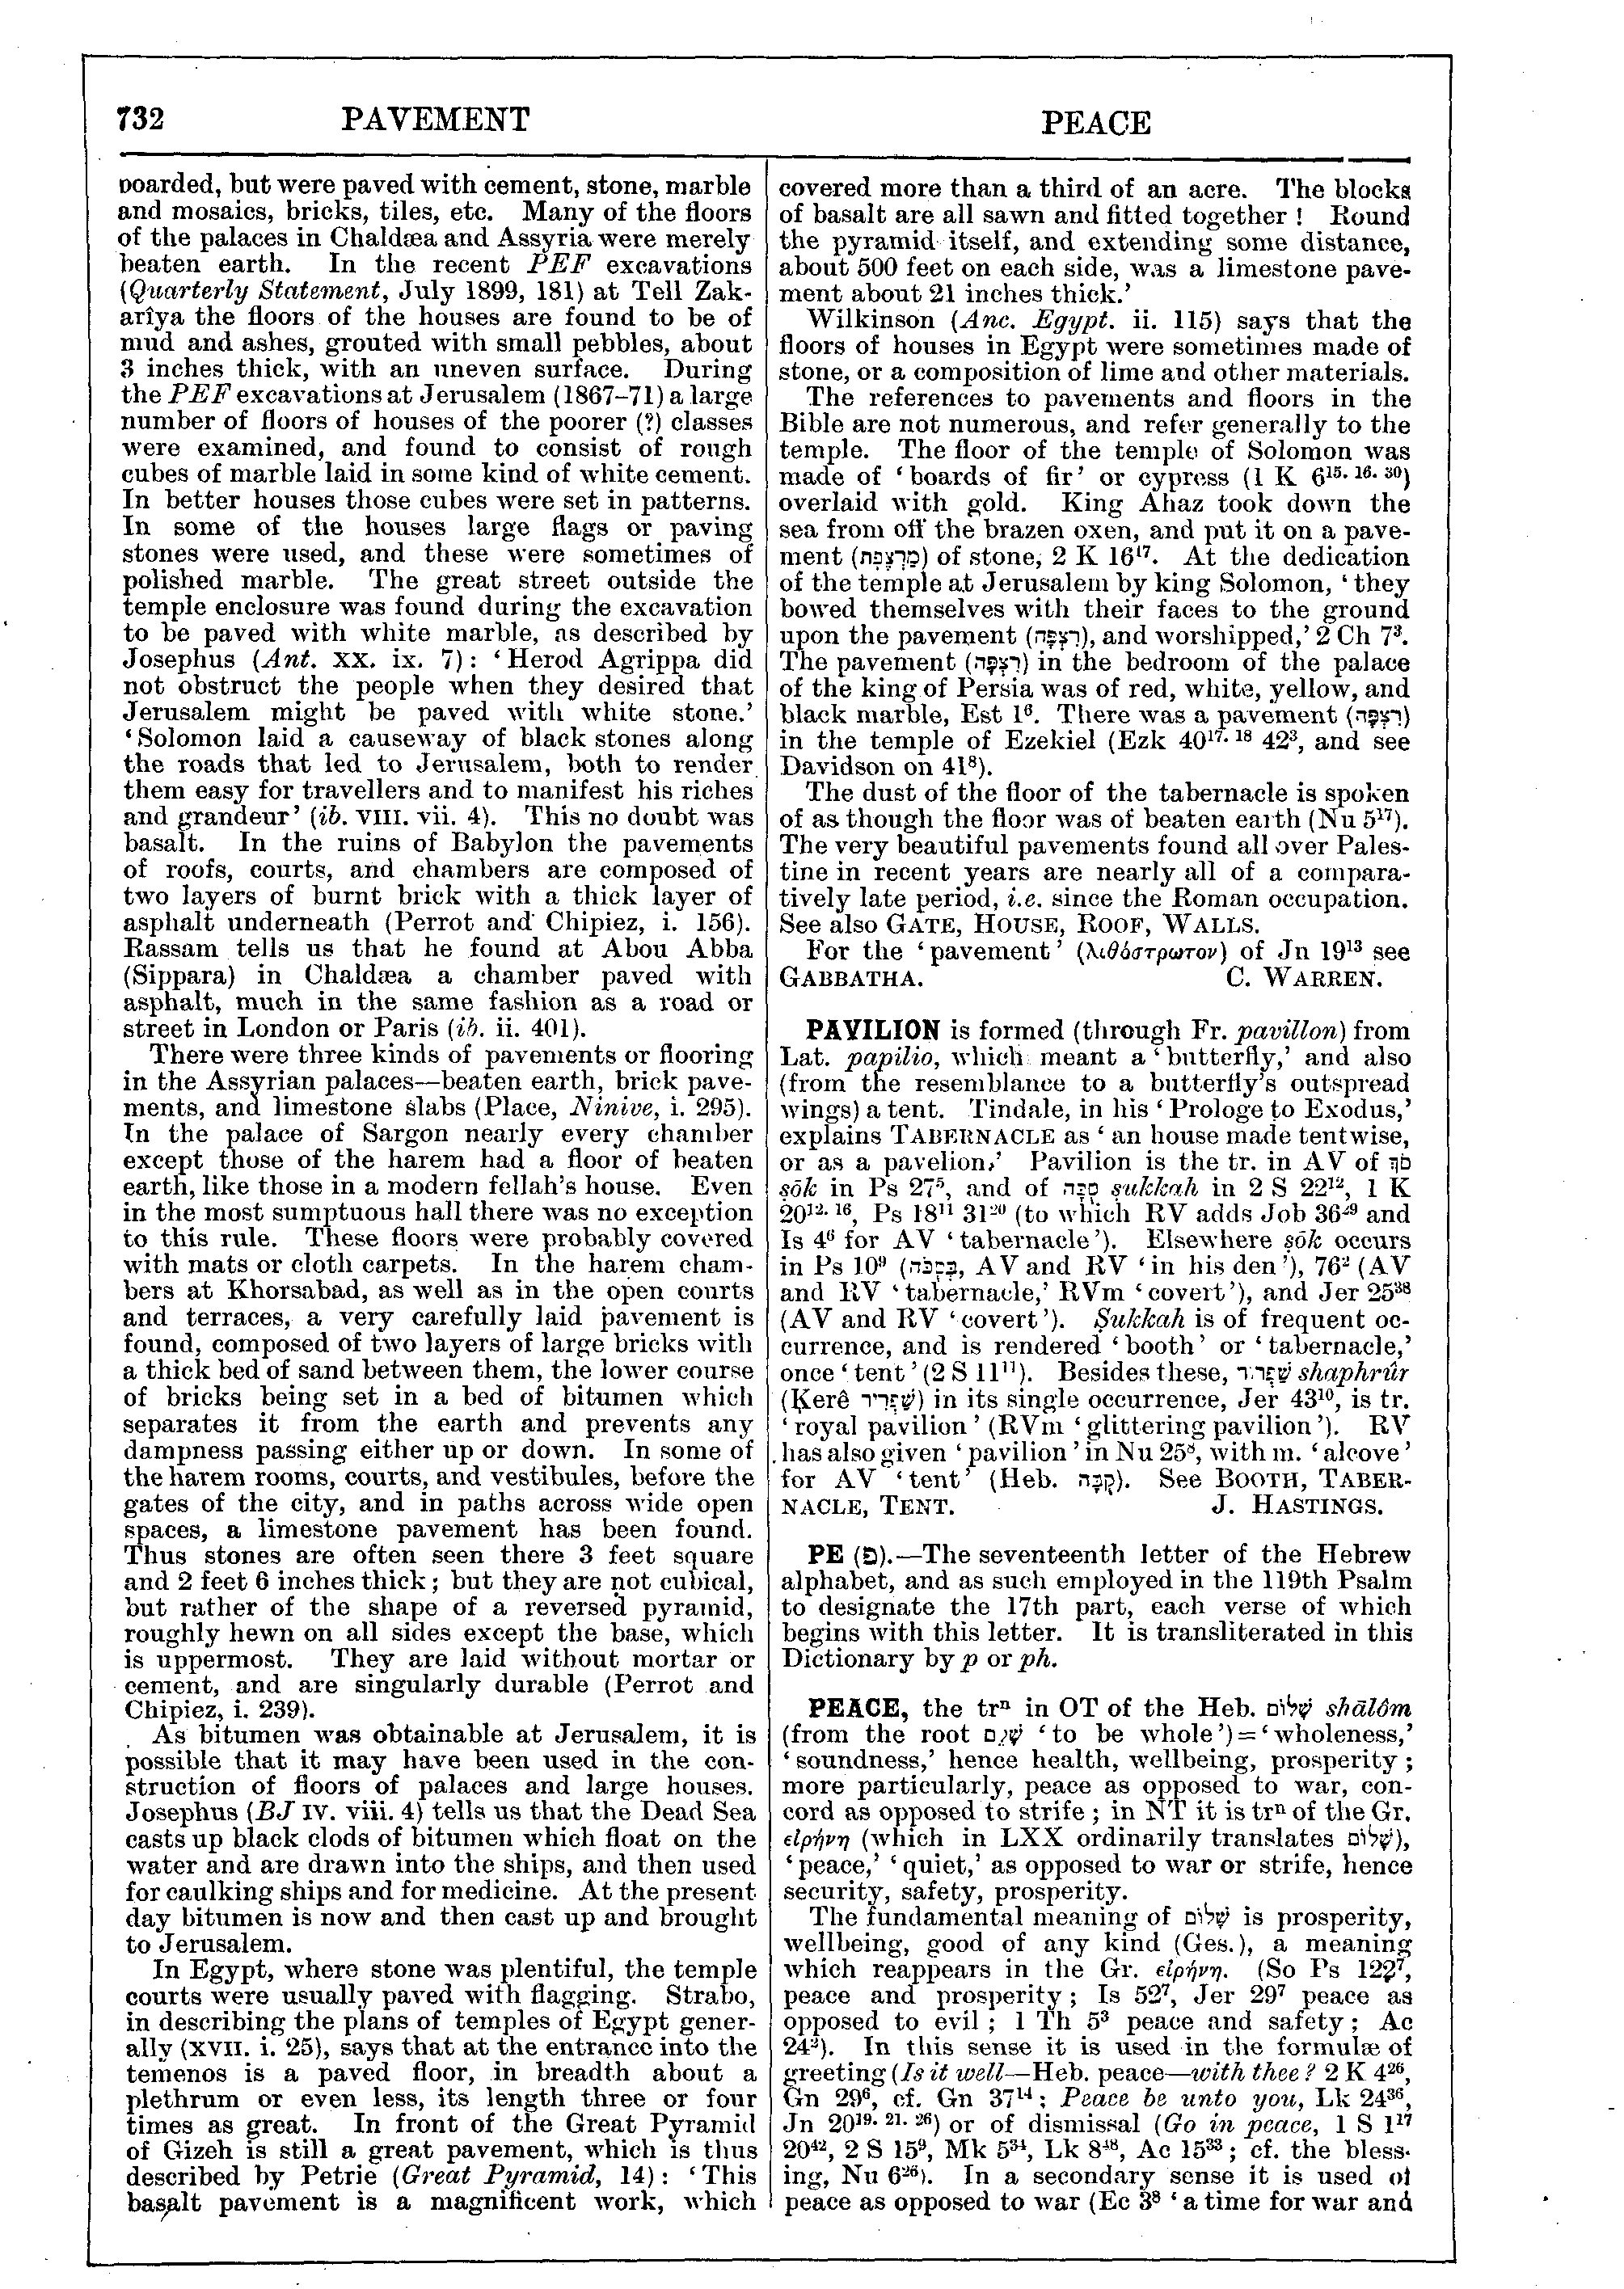 Image of page 732